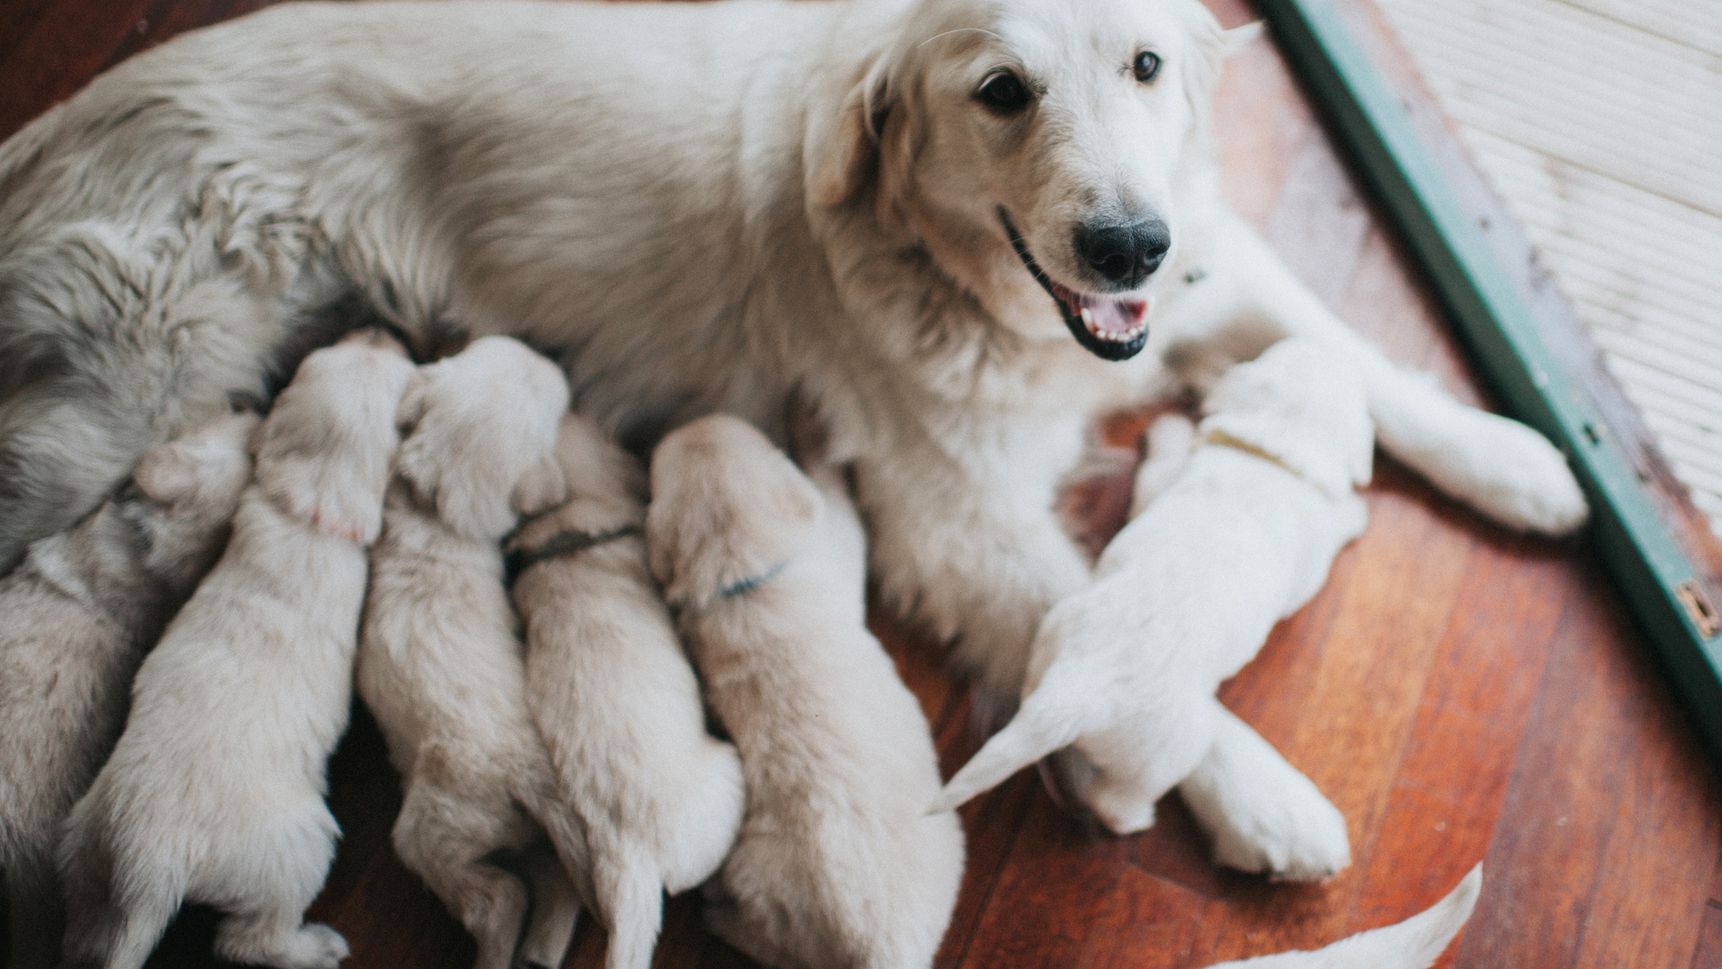 Instructions on how to help give birth to dogs easily